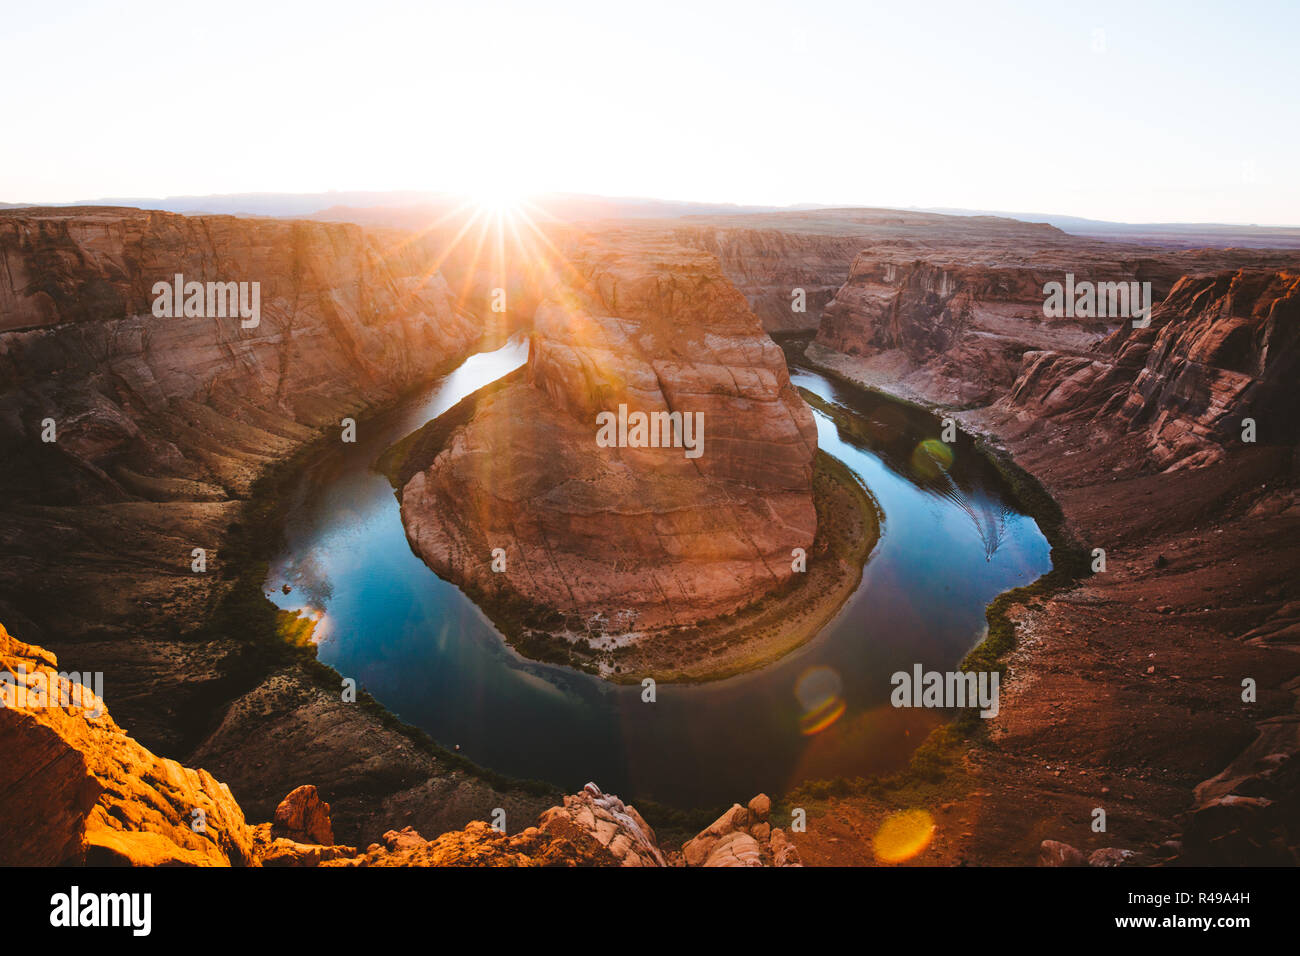 Classic wide-angle sunset view of famous Horseshoe Bend, a horseshoe-shaped meander of the Colorado River located near the town of Page, Arizona, USA Stock Photo